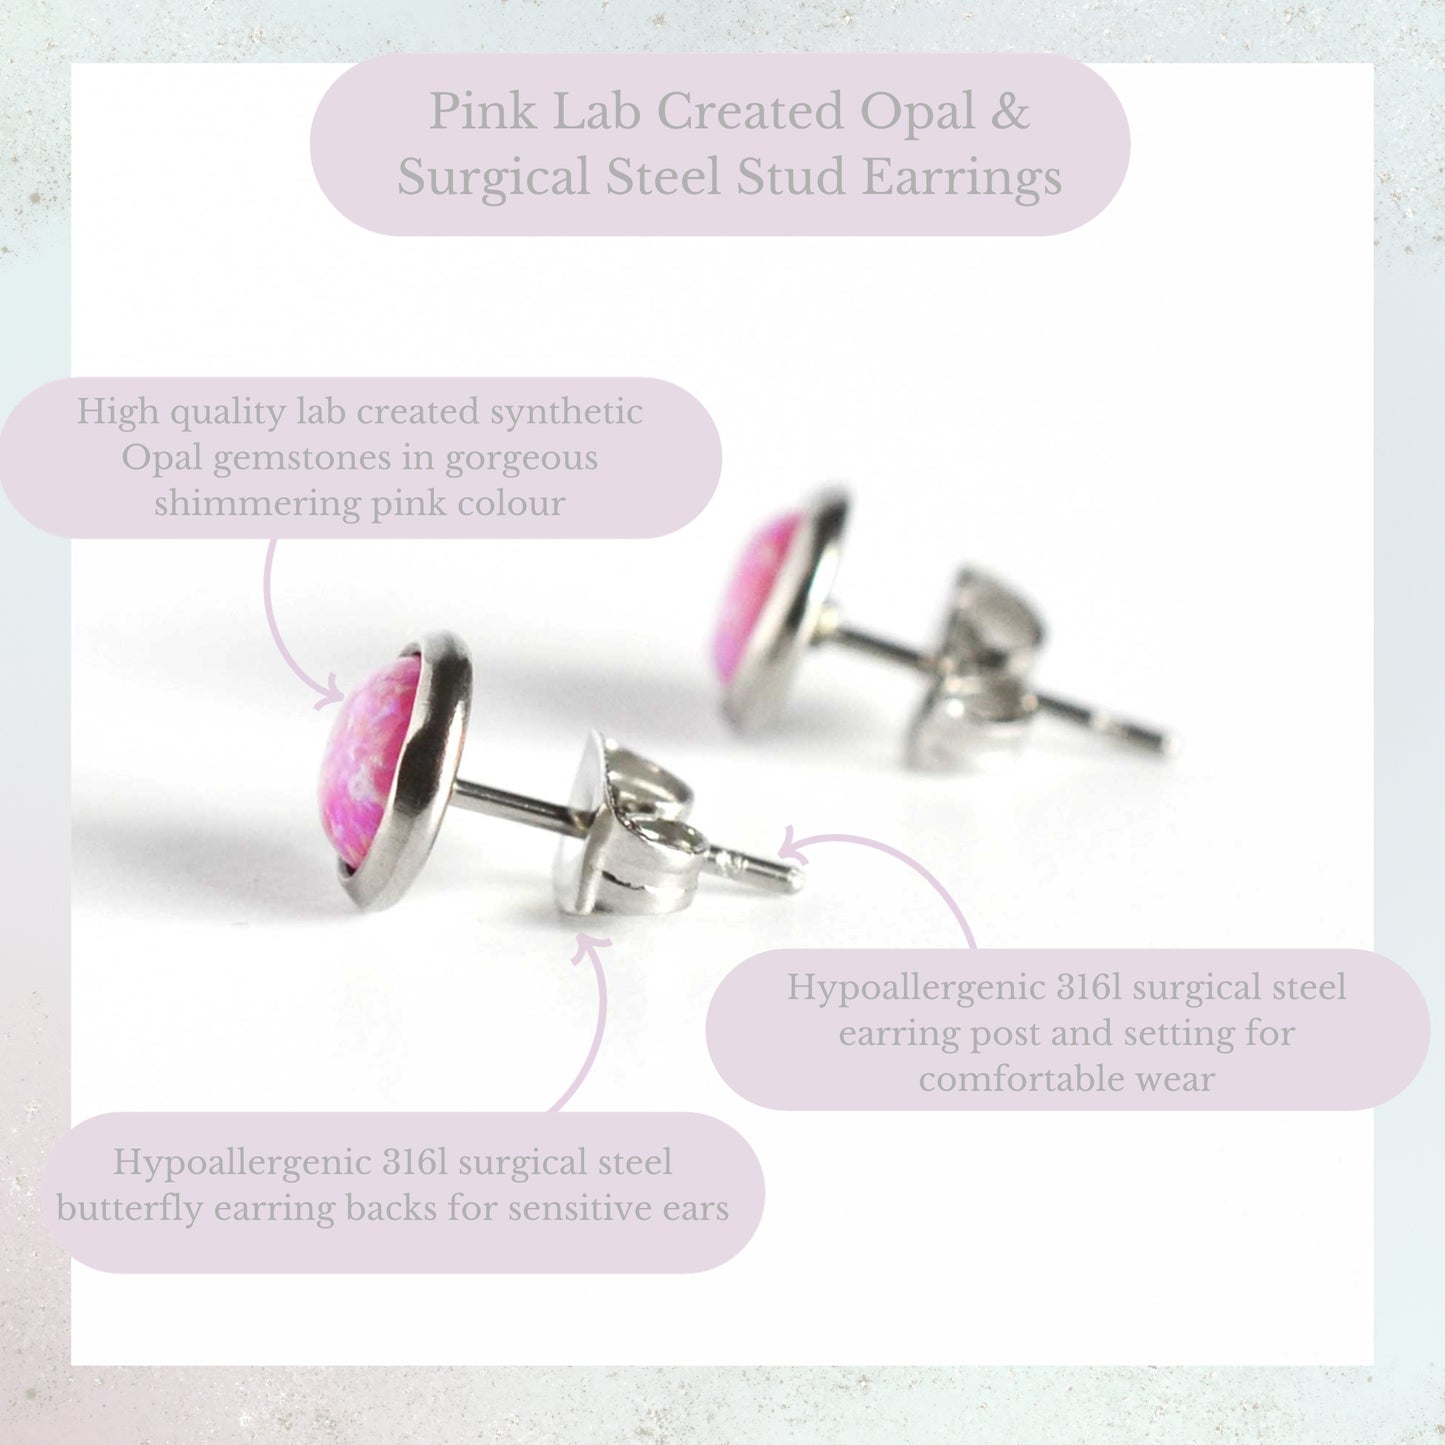 Pink Lab Created Opal & Surgical Steel Stud Earrings Product Information Graphic